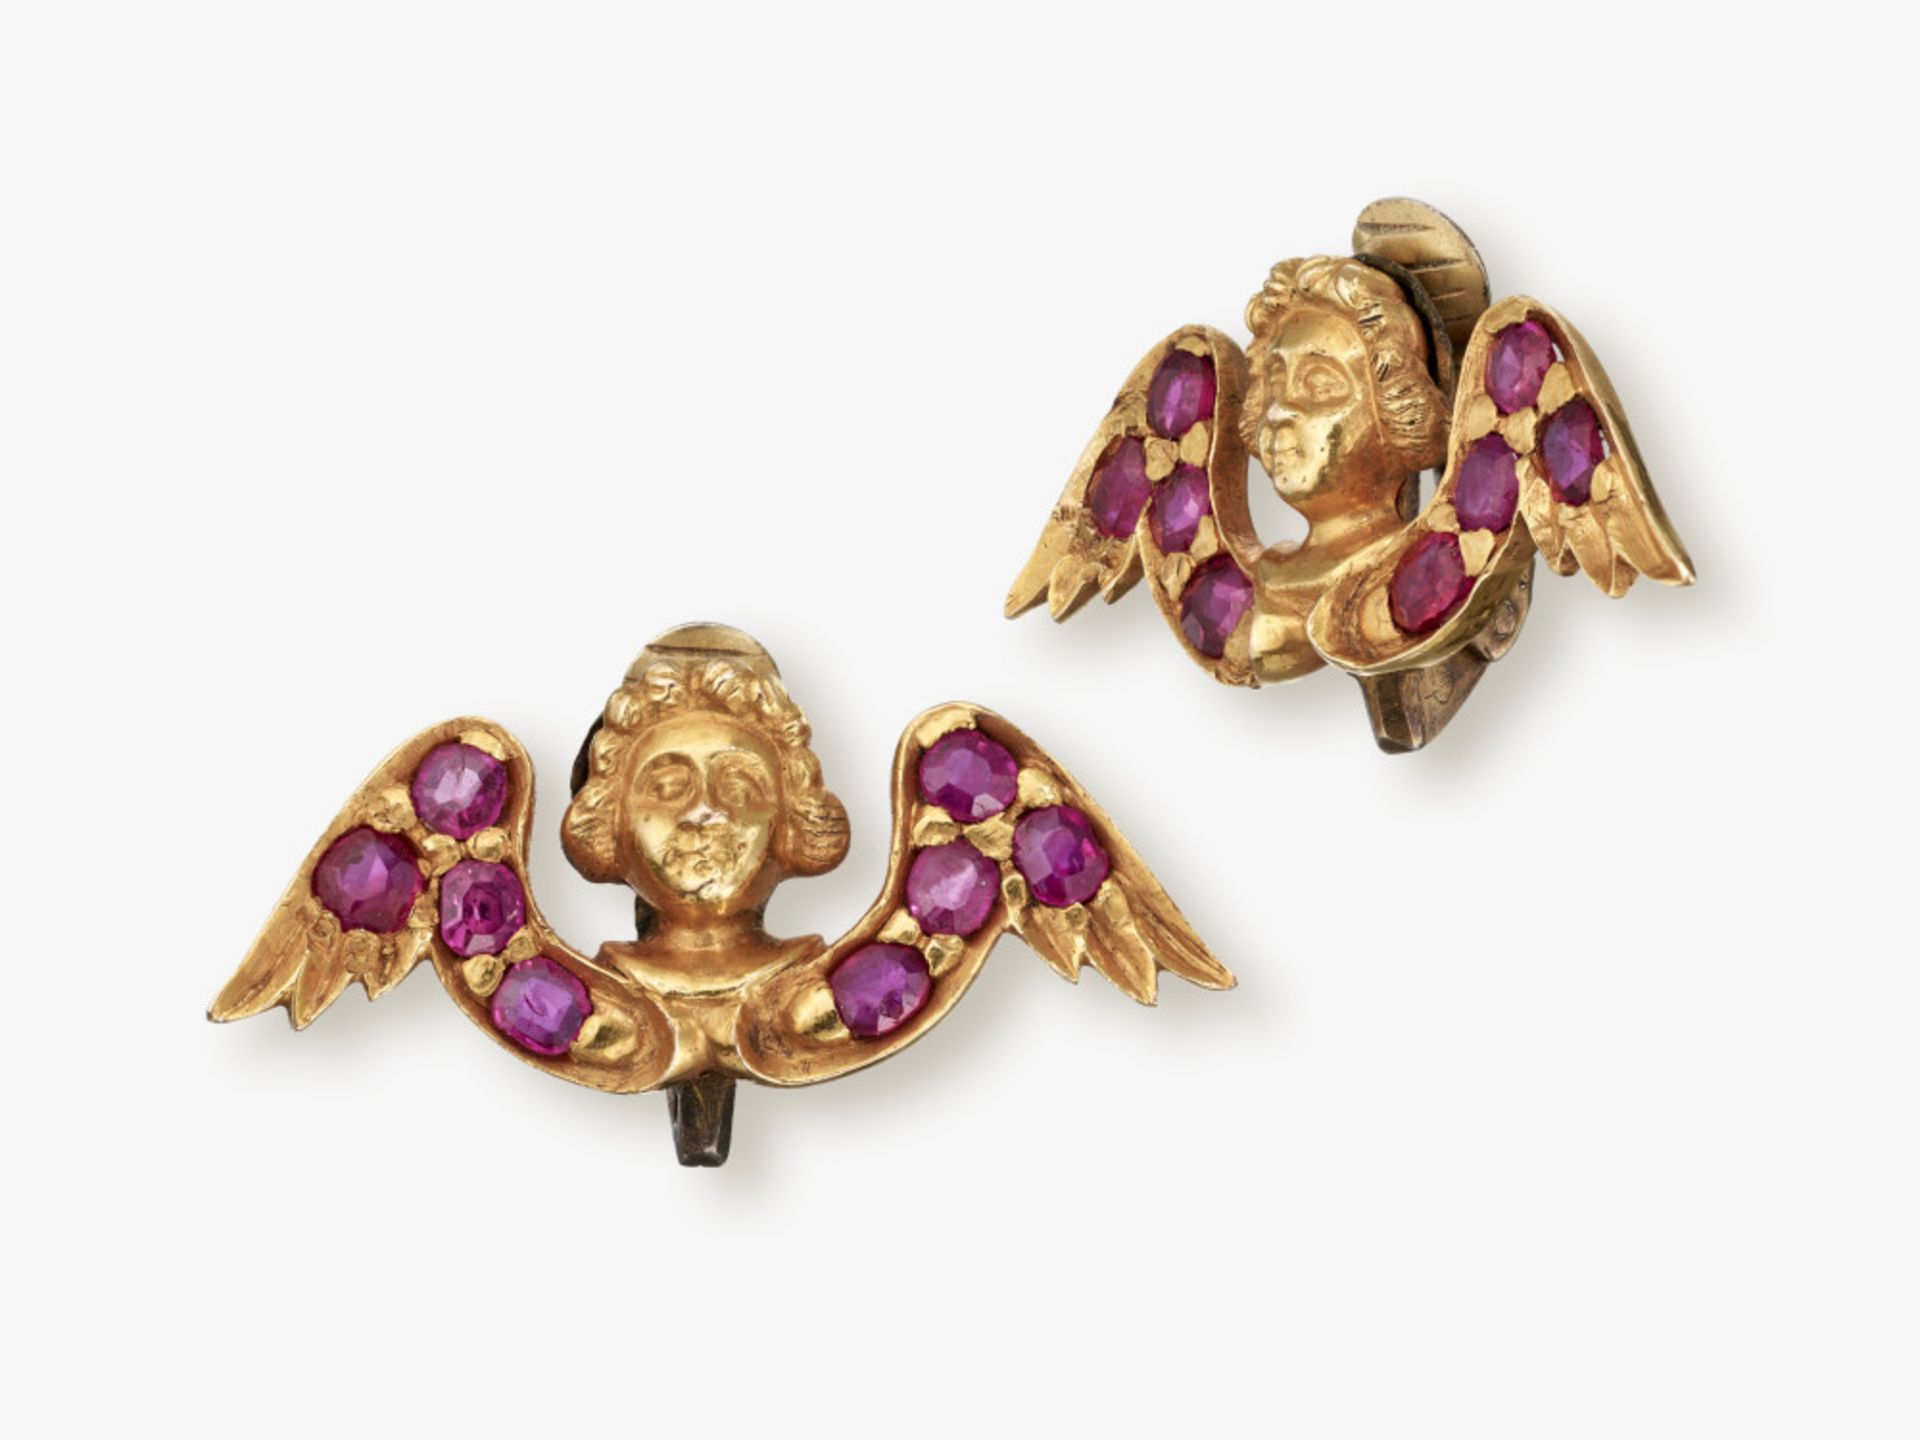 A pair of ear clips in the shape of putti with rubies - 2nd half of the 19th century